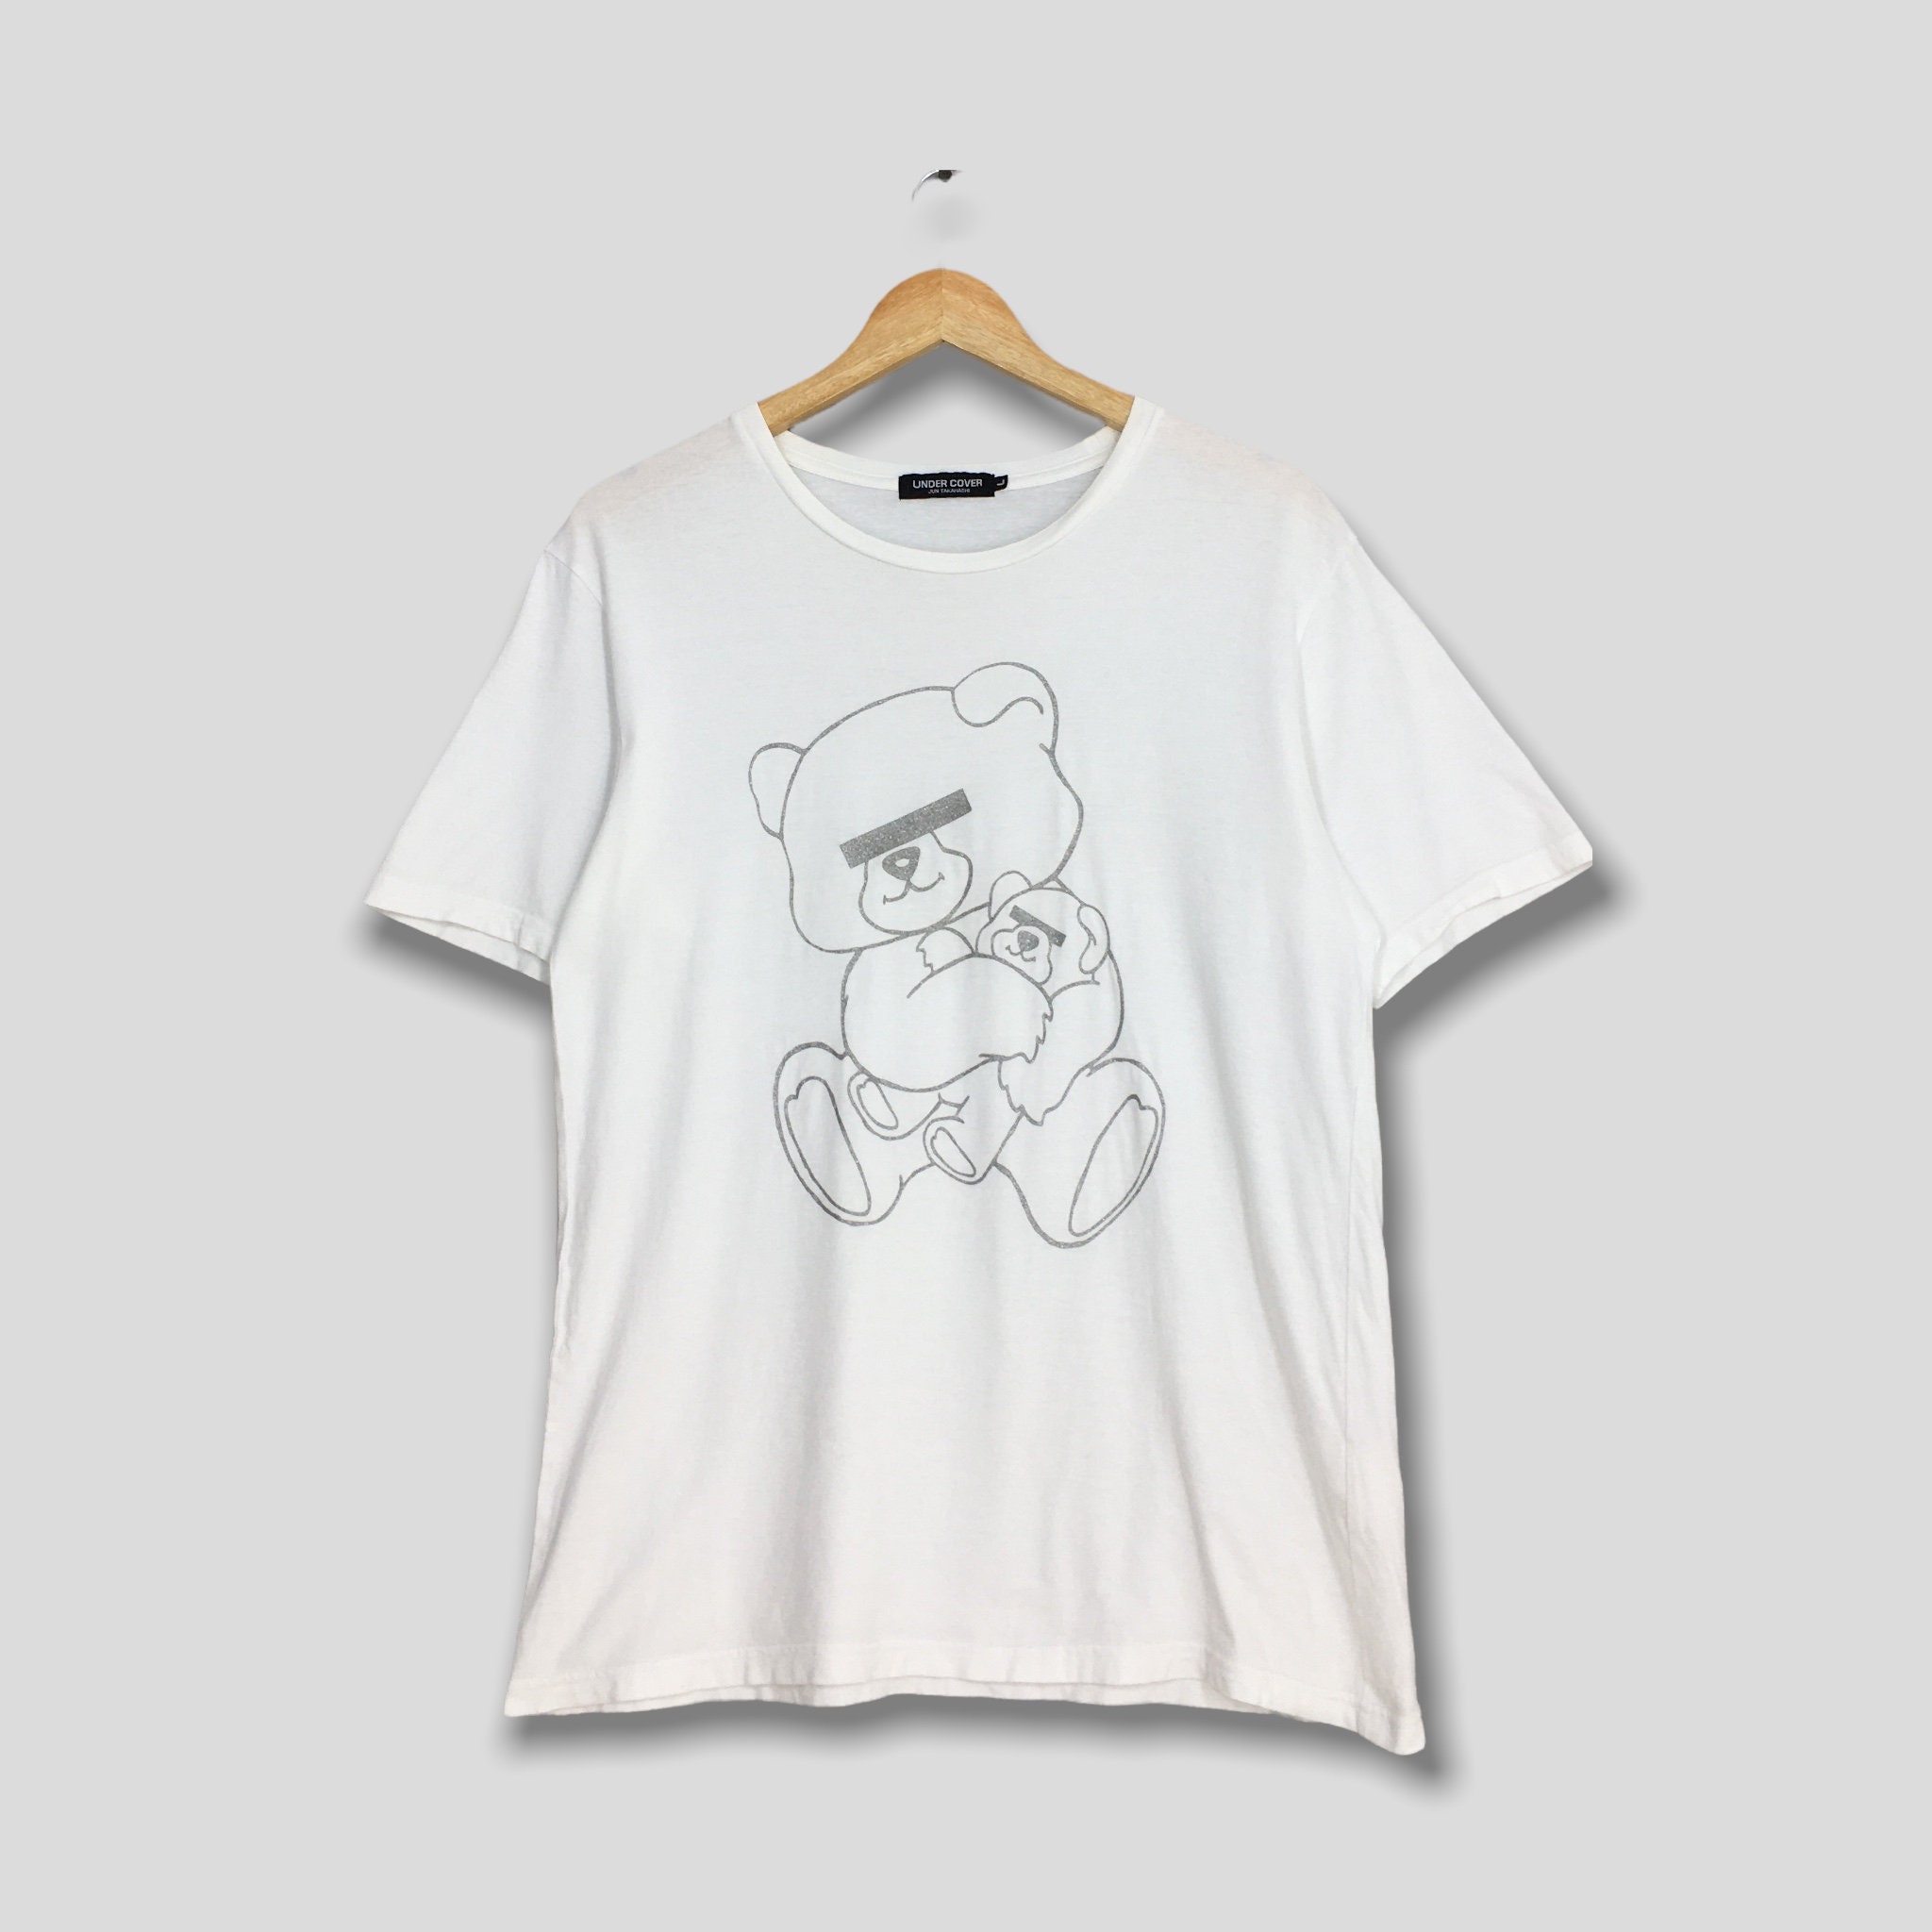 Undercover Japan Teddy Bear T Shirt Large White Under Cover